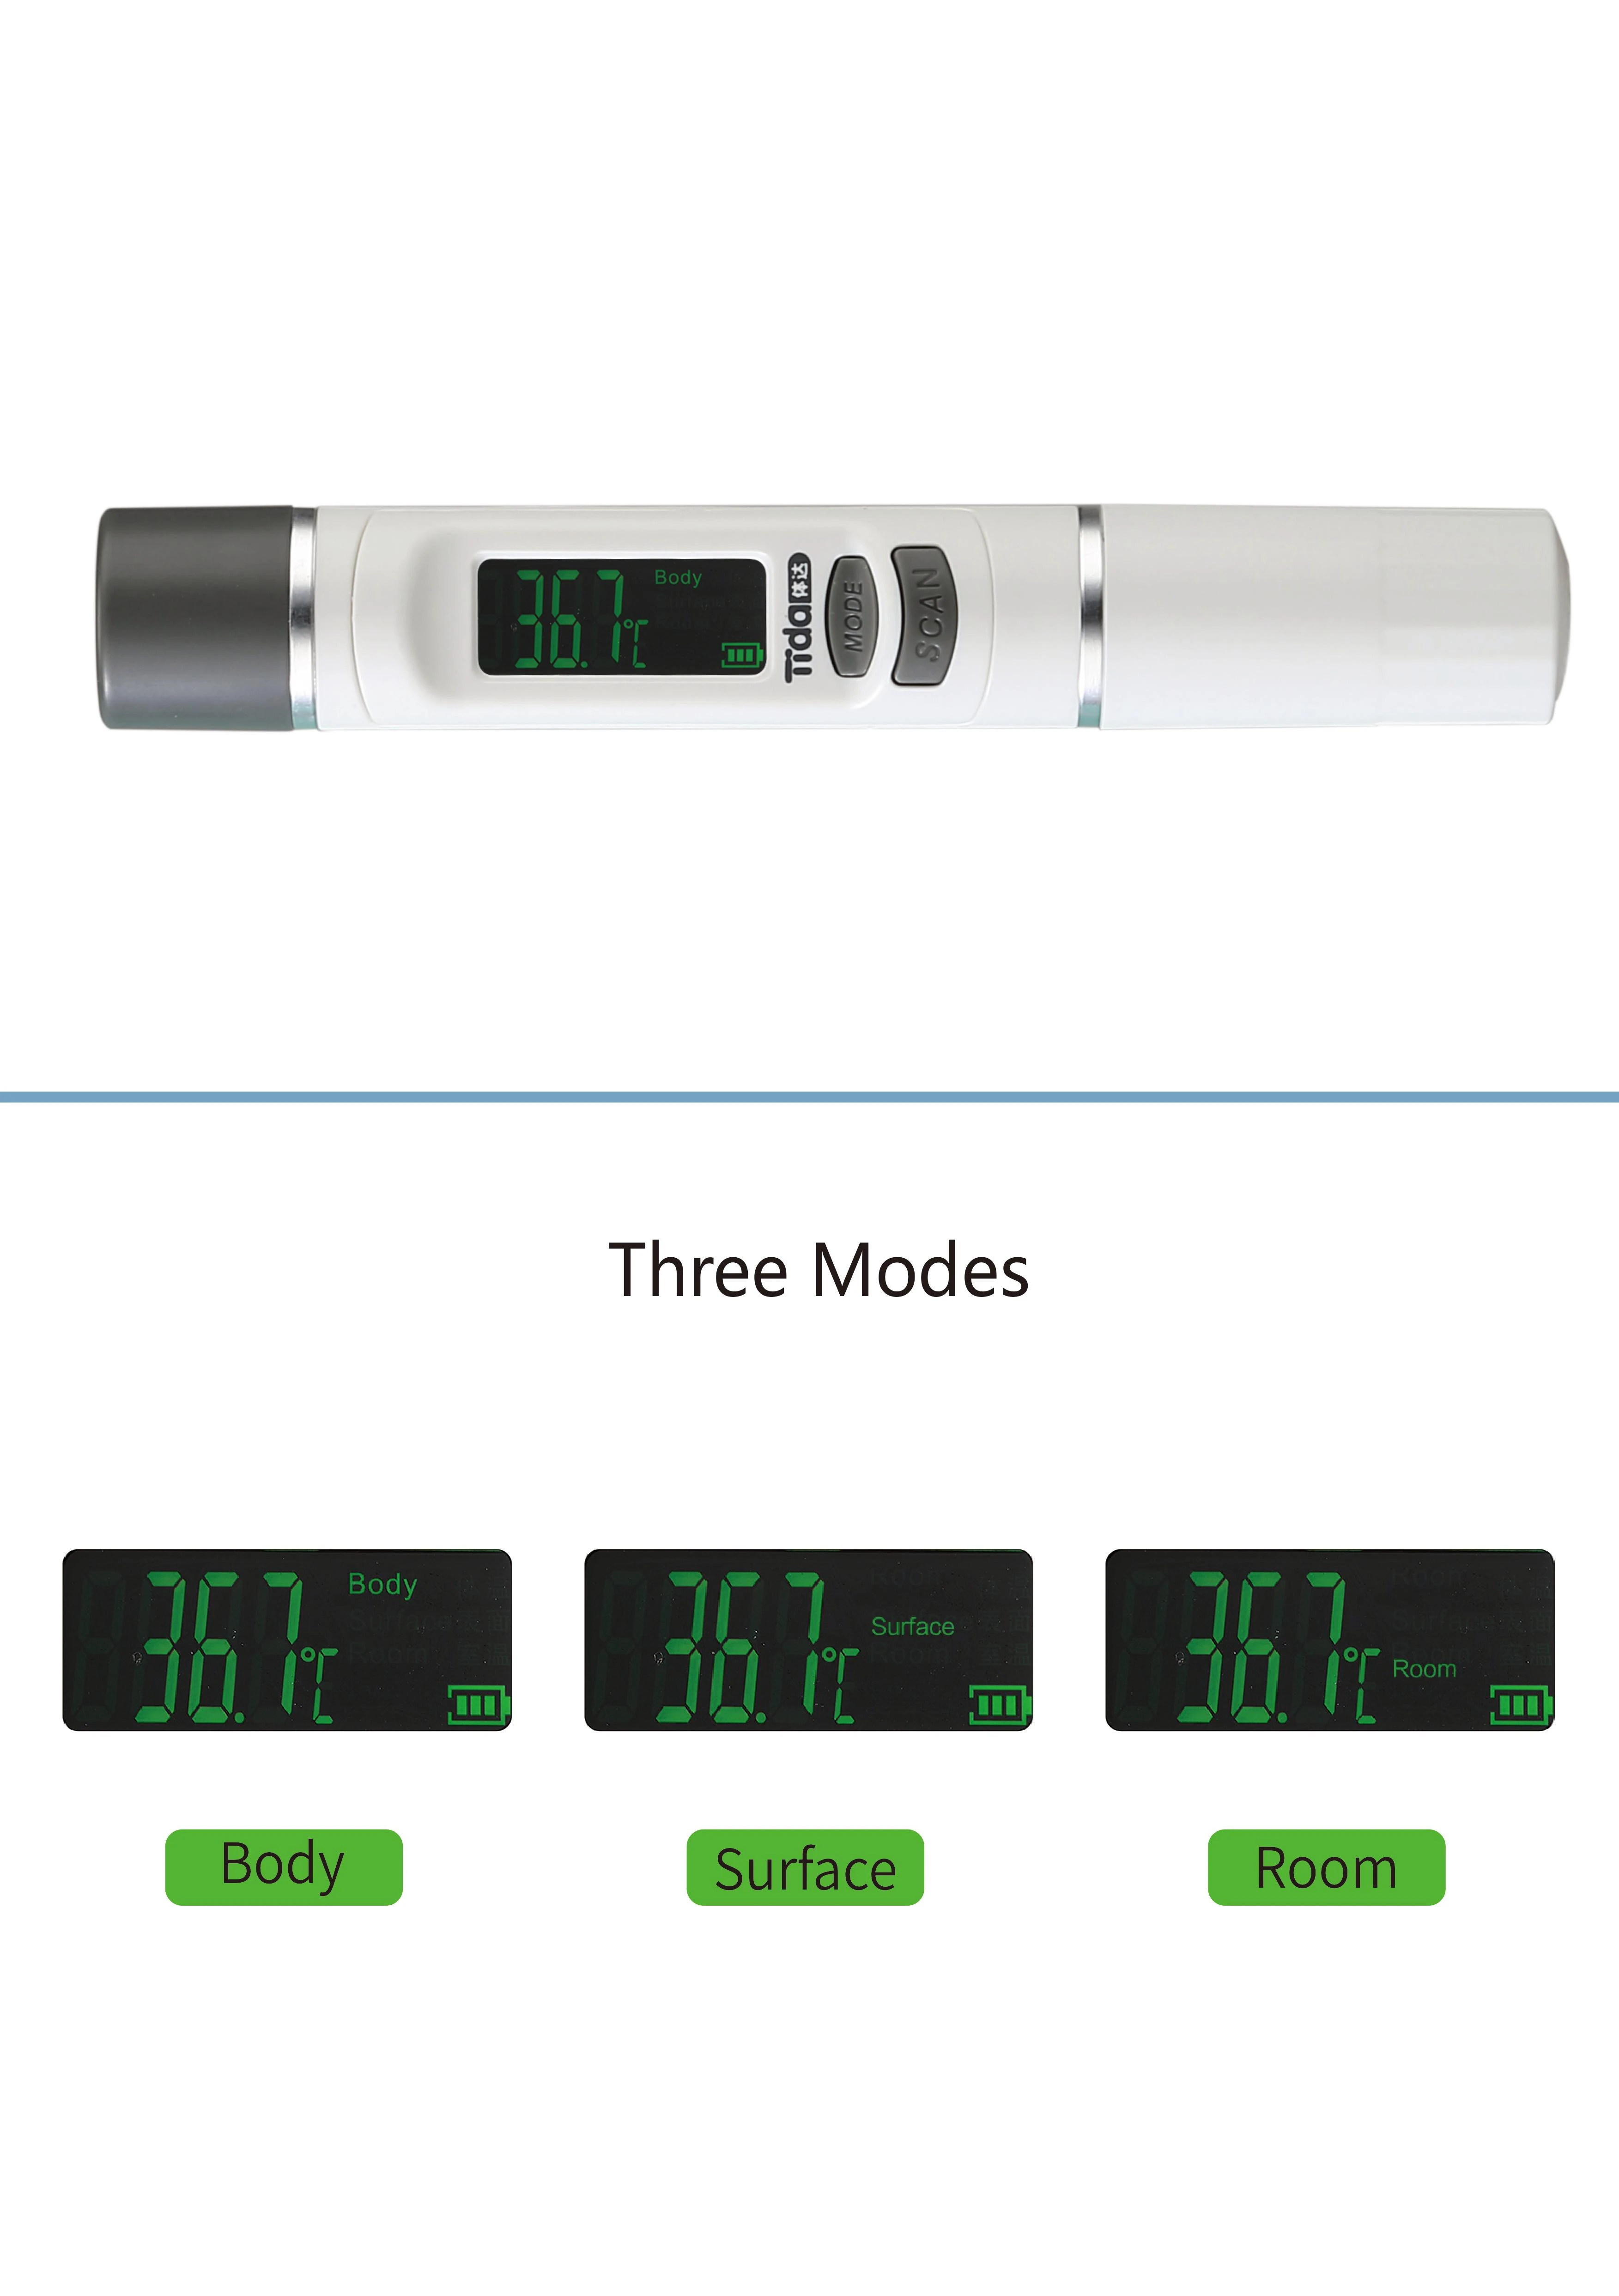 Single use ready to ship head infra red led thermometers non-contact digital